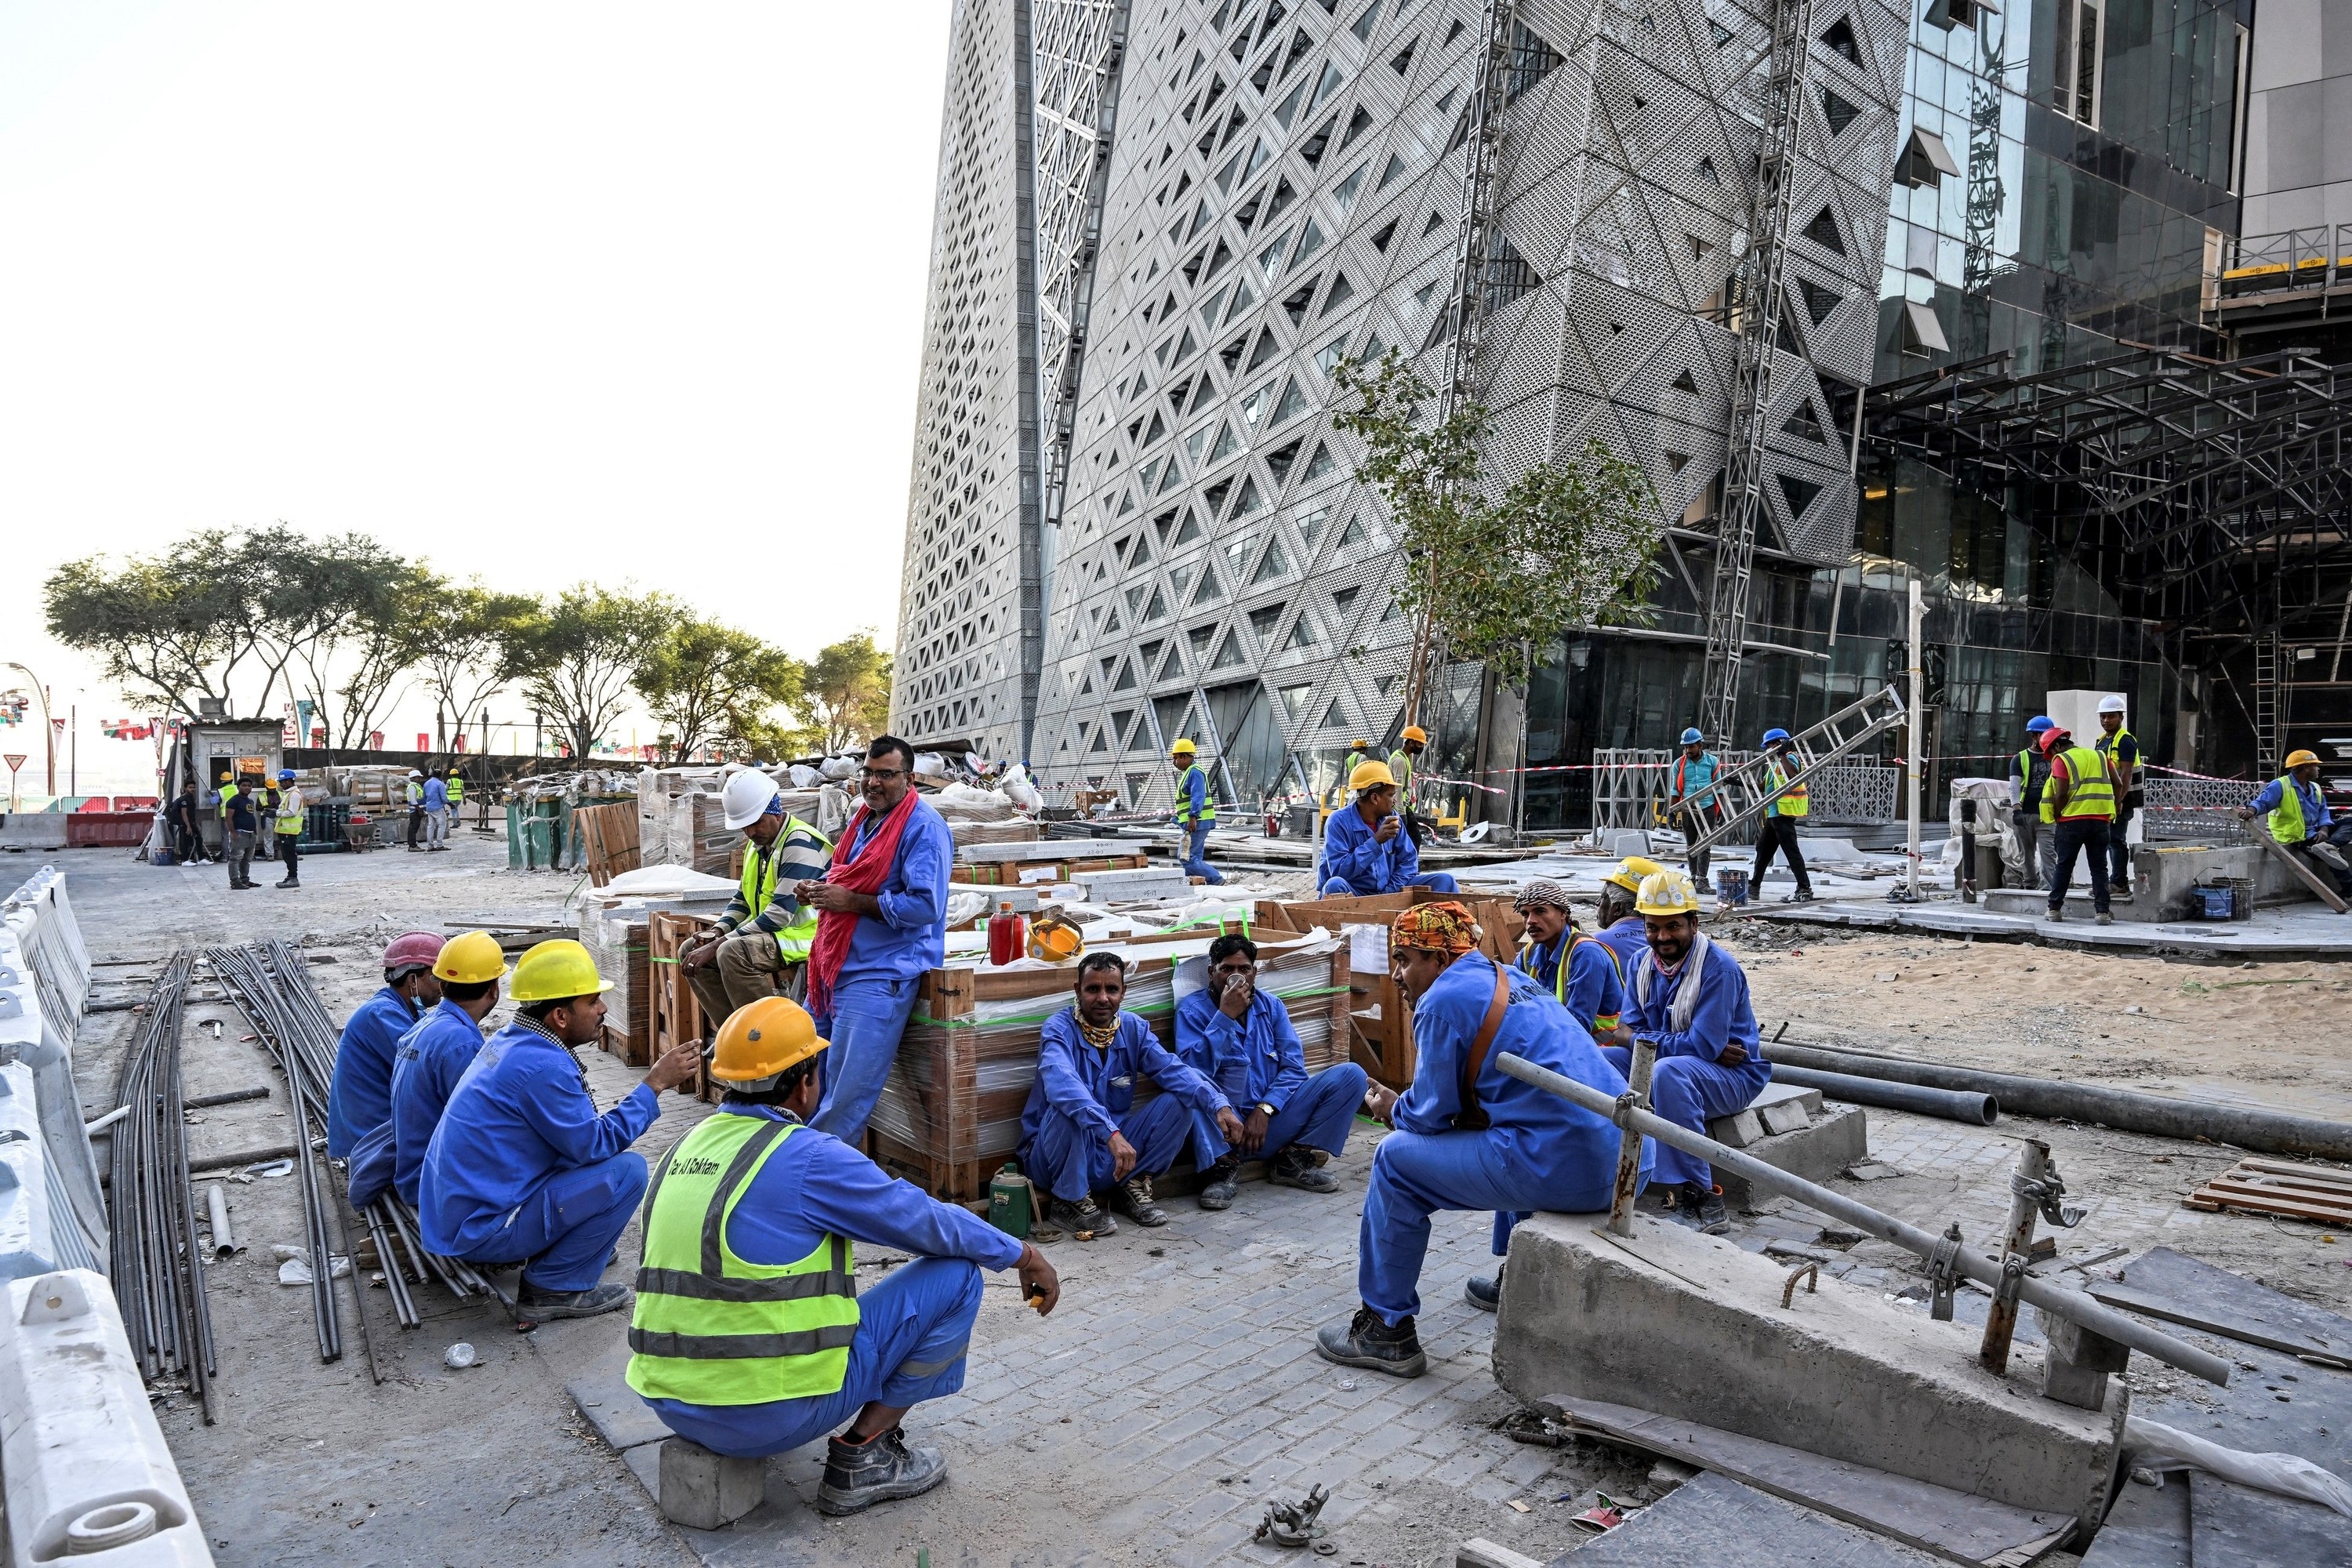 Workers sitting outside the venue under construction